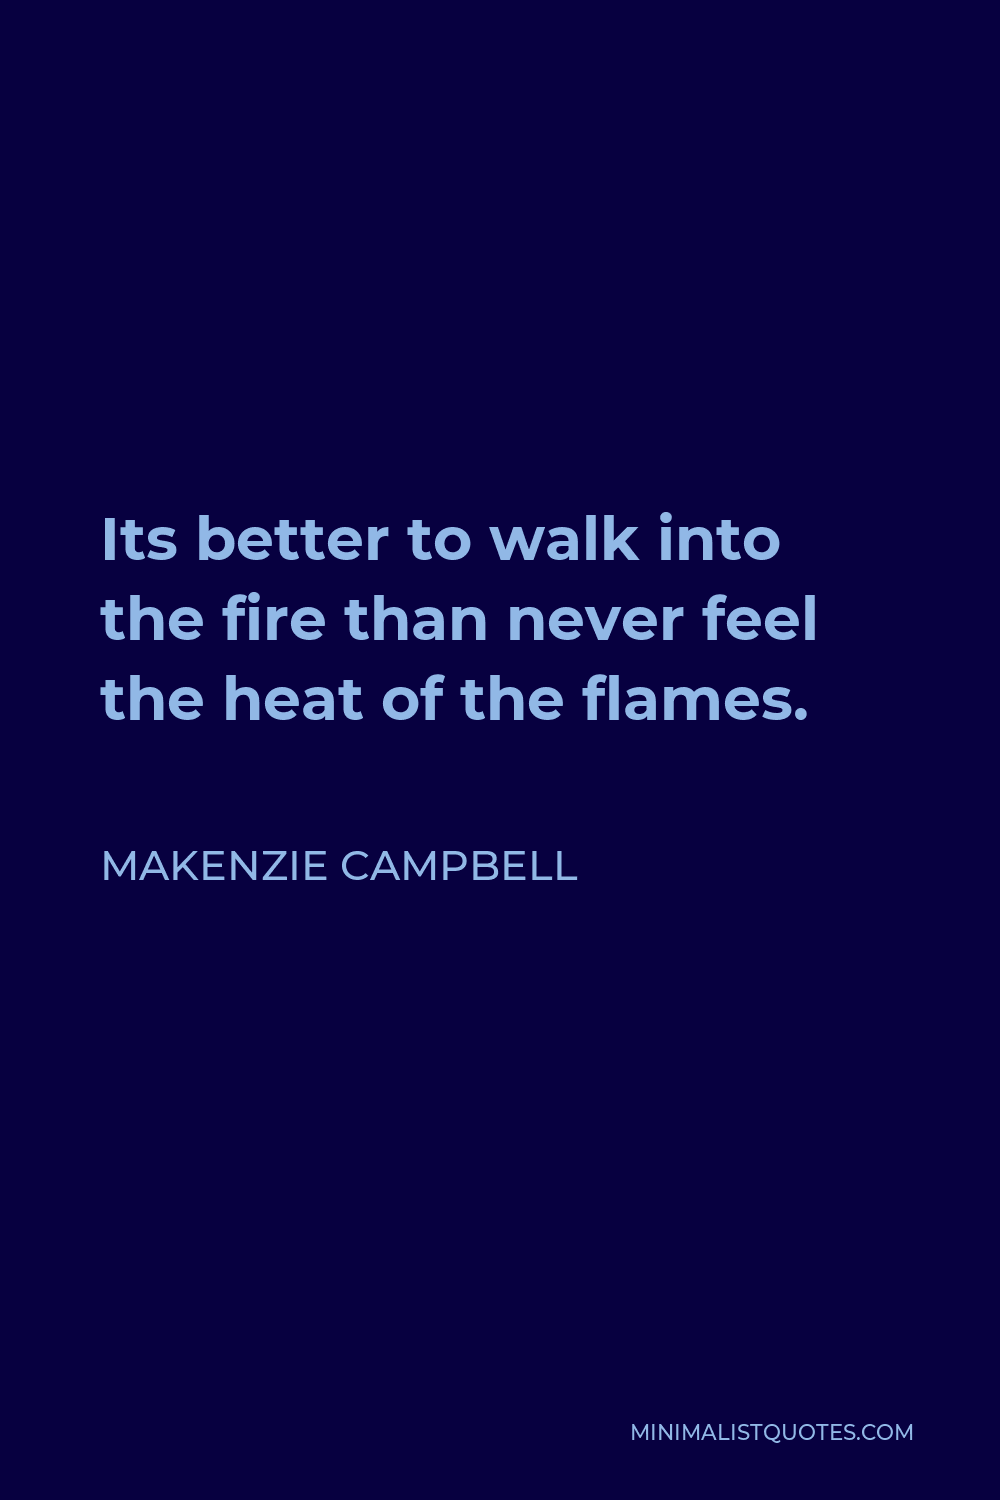 Makenzie Campbell Quote - Its better to walk into the fire than never feel the heat of the flames.